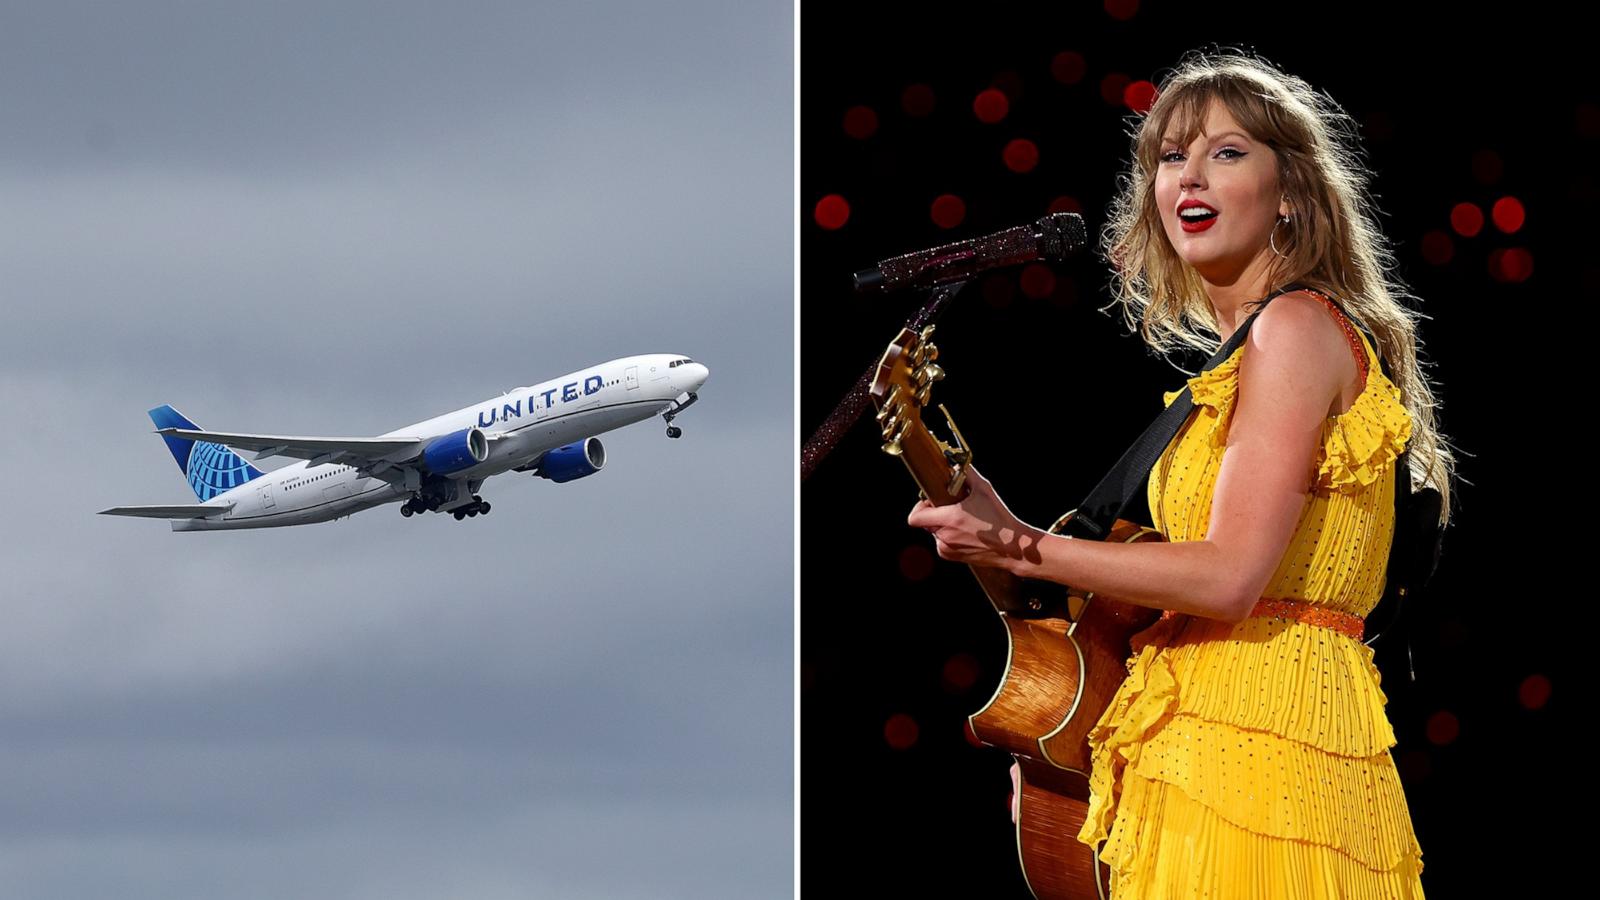 PHOTO: United Airlines, Taylor Swift